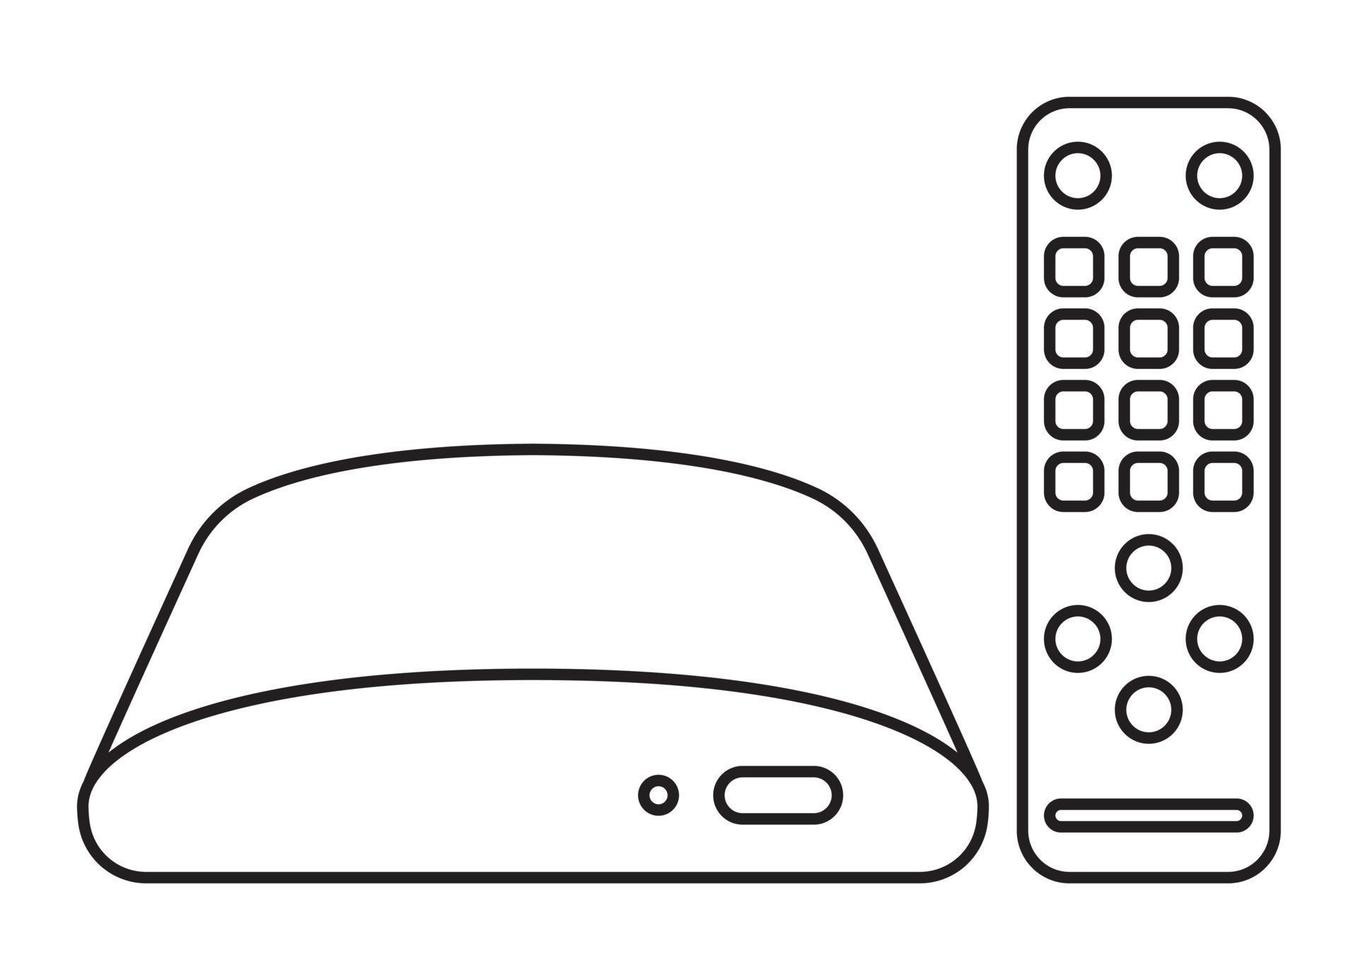 Digital media player setup box with remote controllers line art icon for apps and websites vector